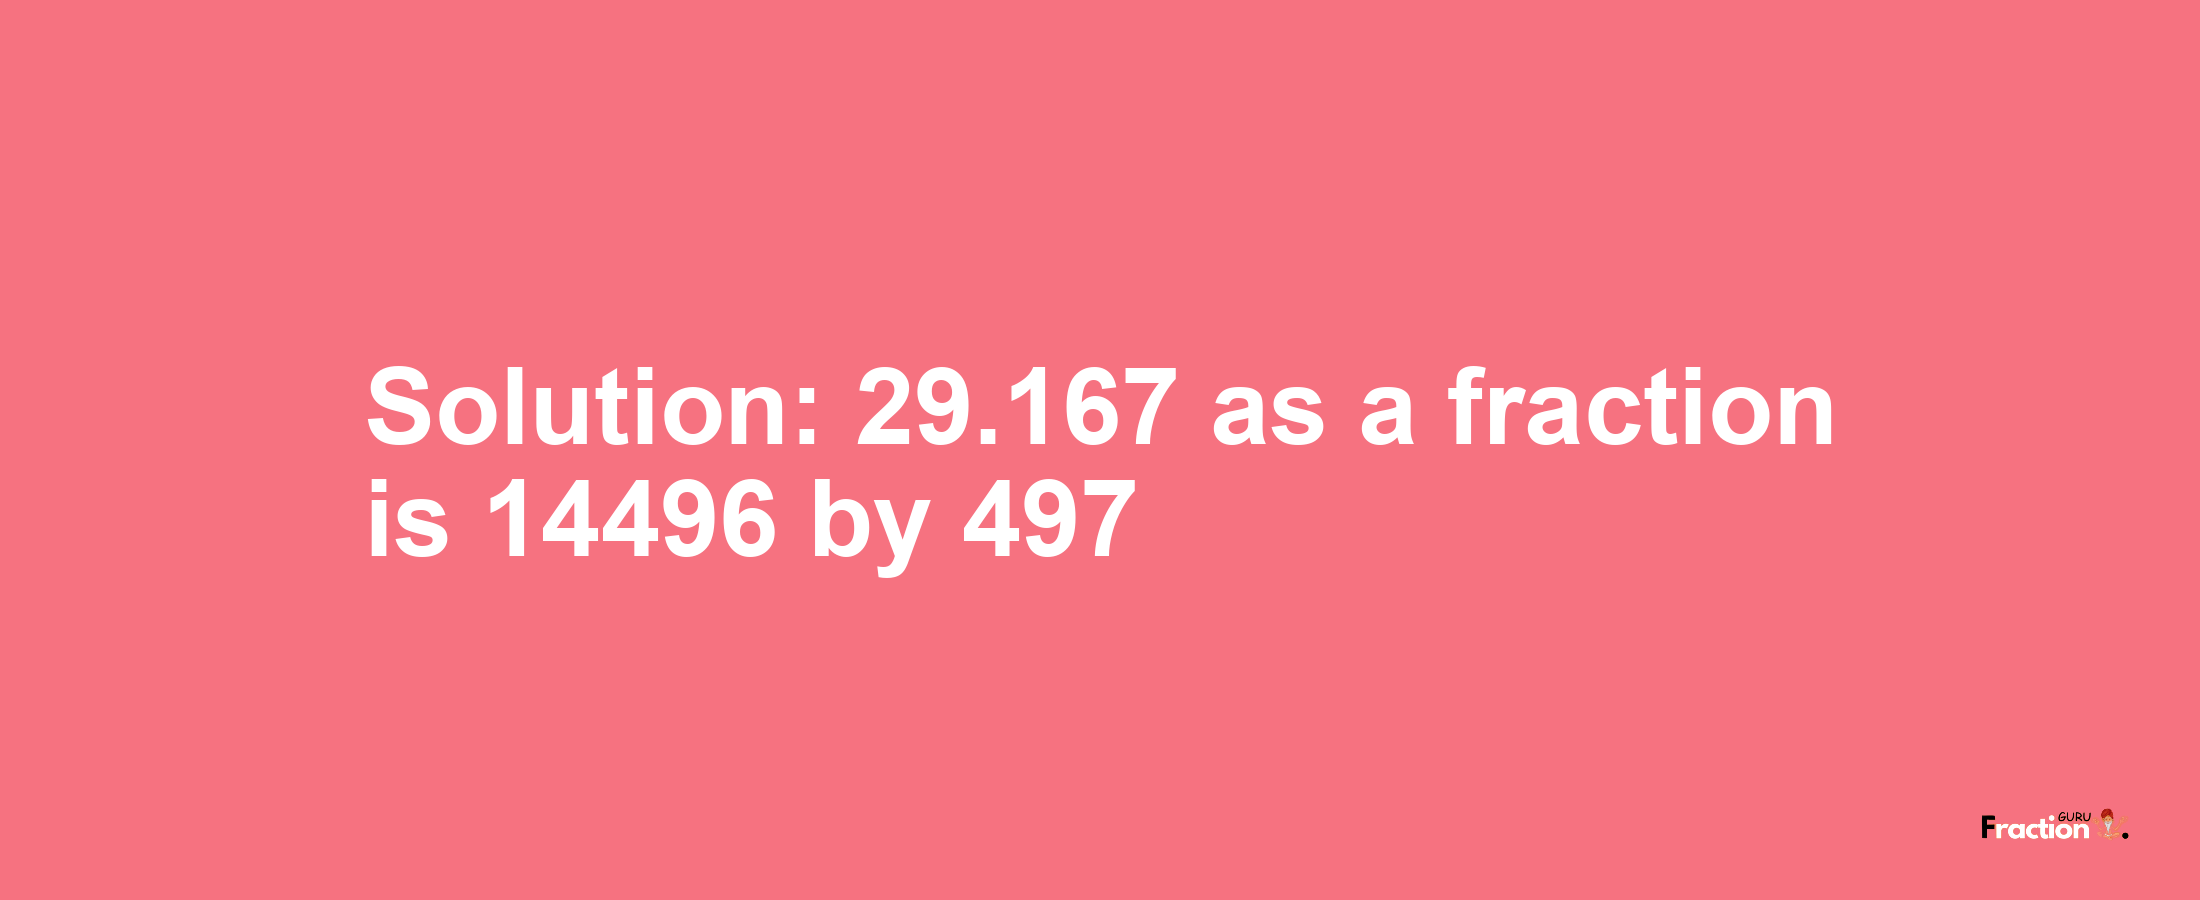 Solution:29.167 as a fraction is 14496/497